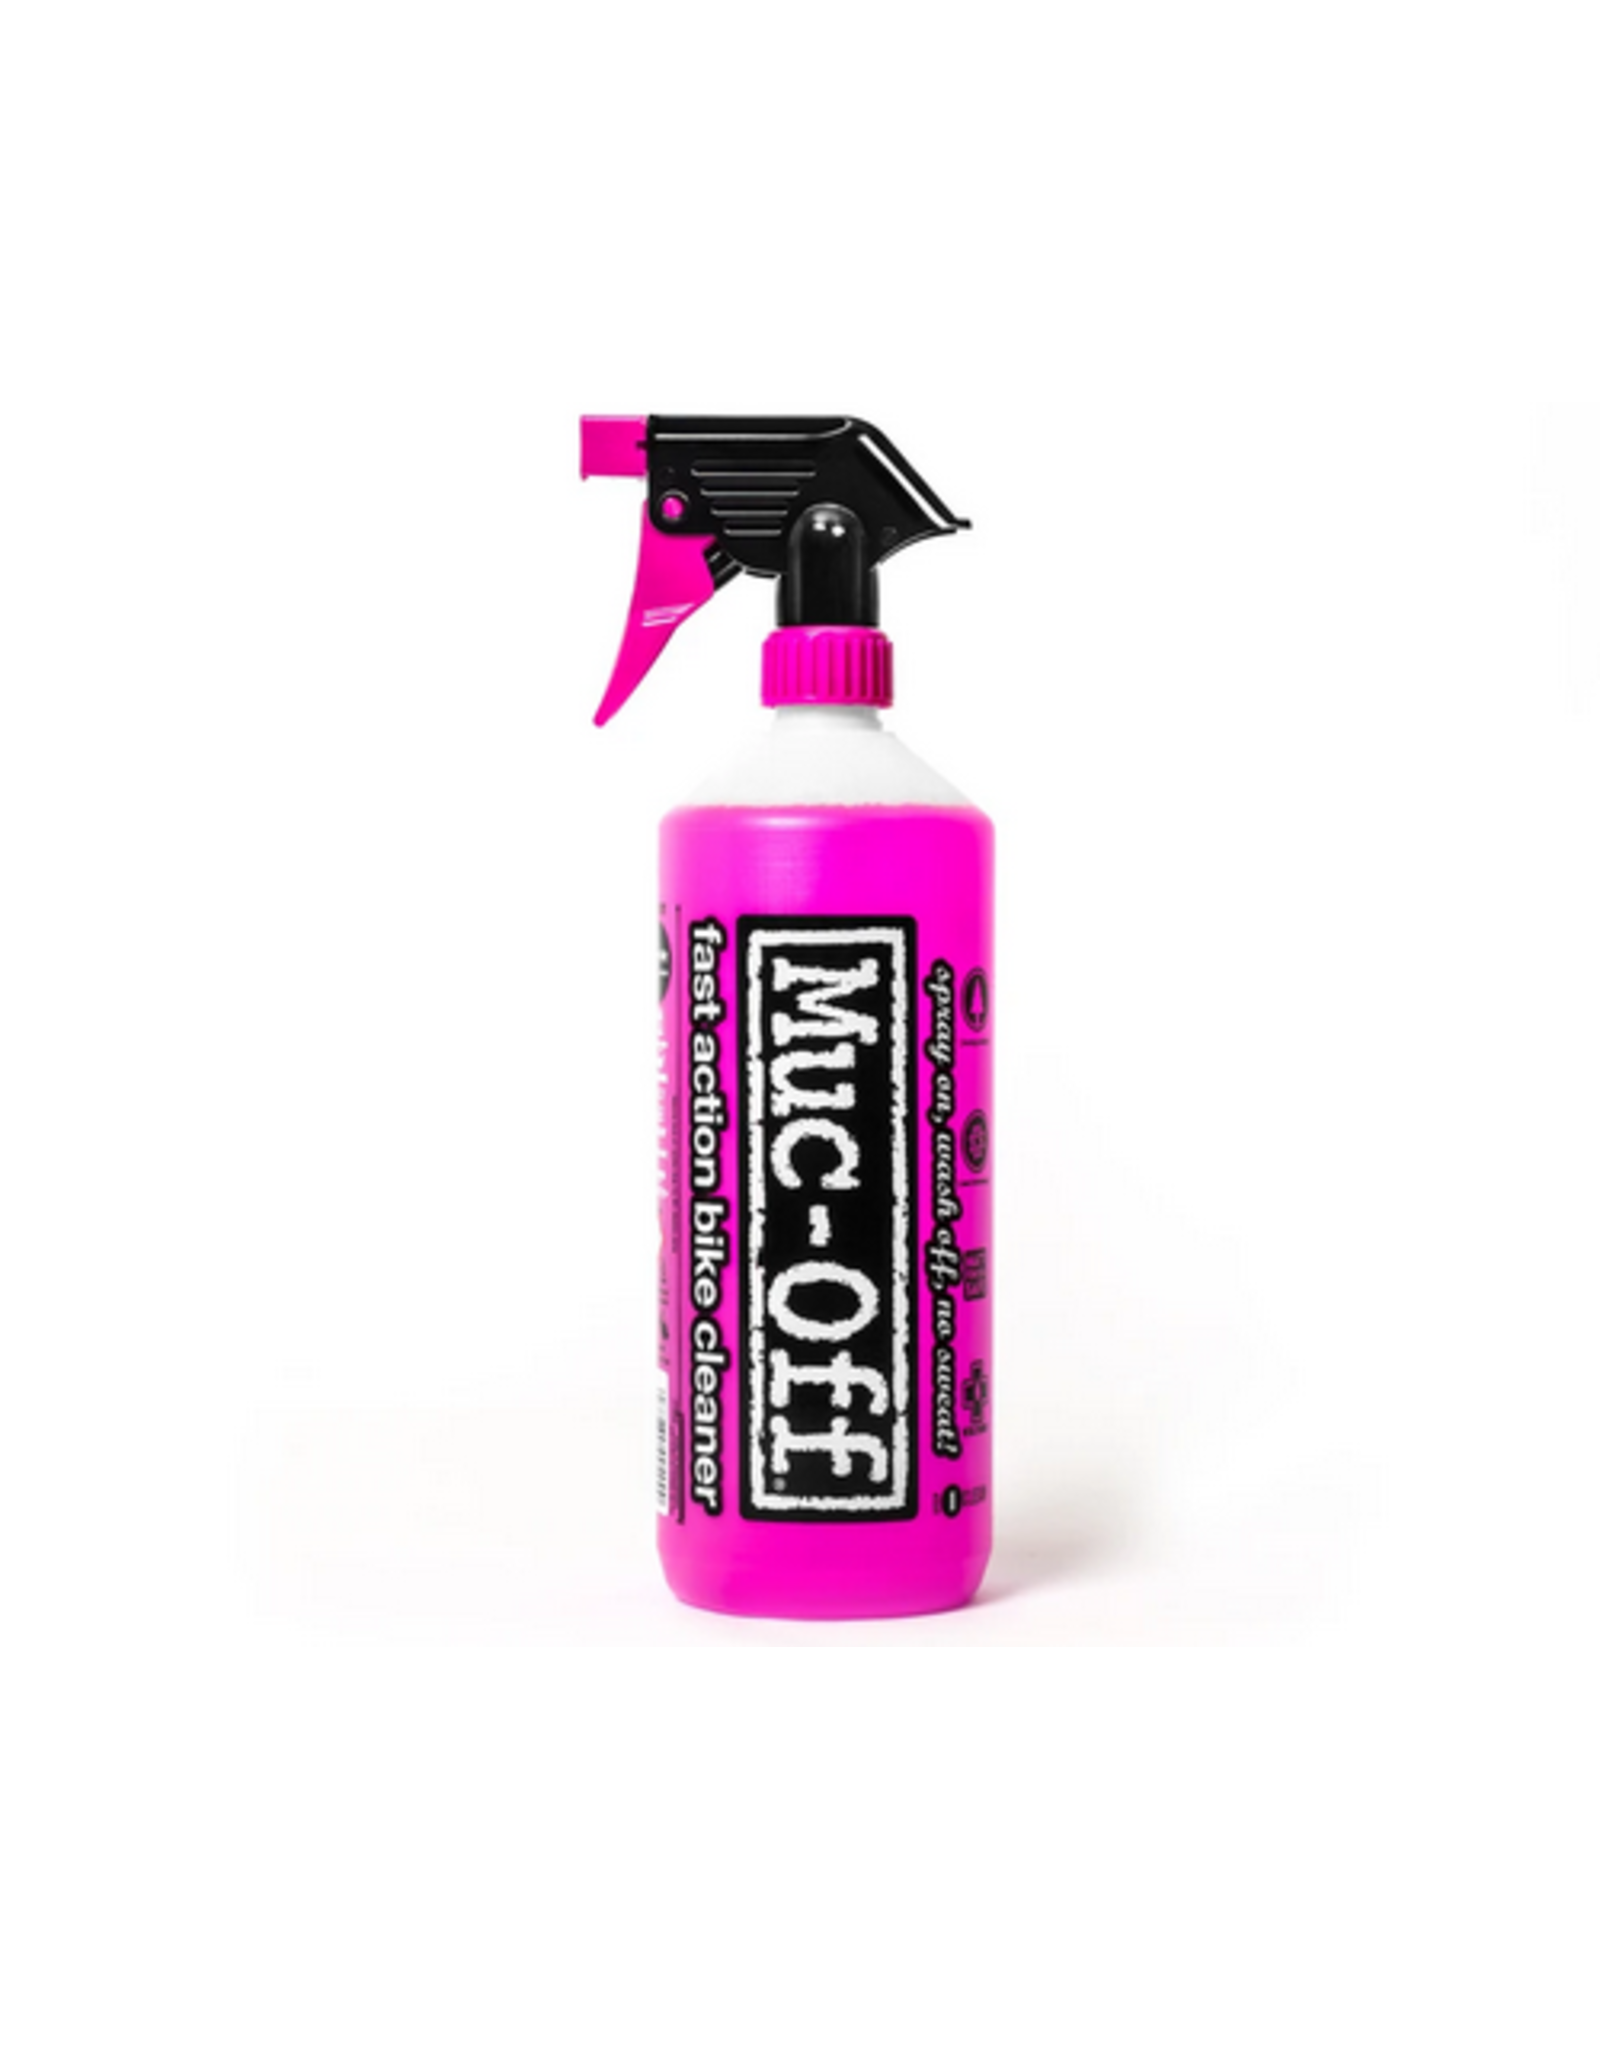 MUC-OFF Muc-Off, 8-in-1 Bicycle Cleaning Kit